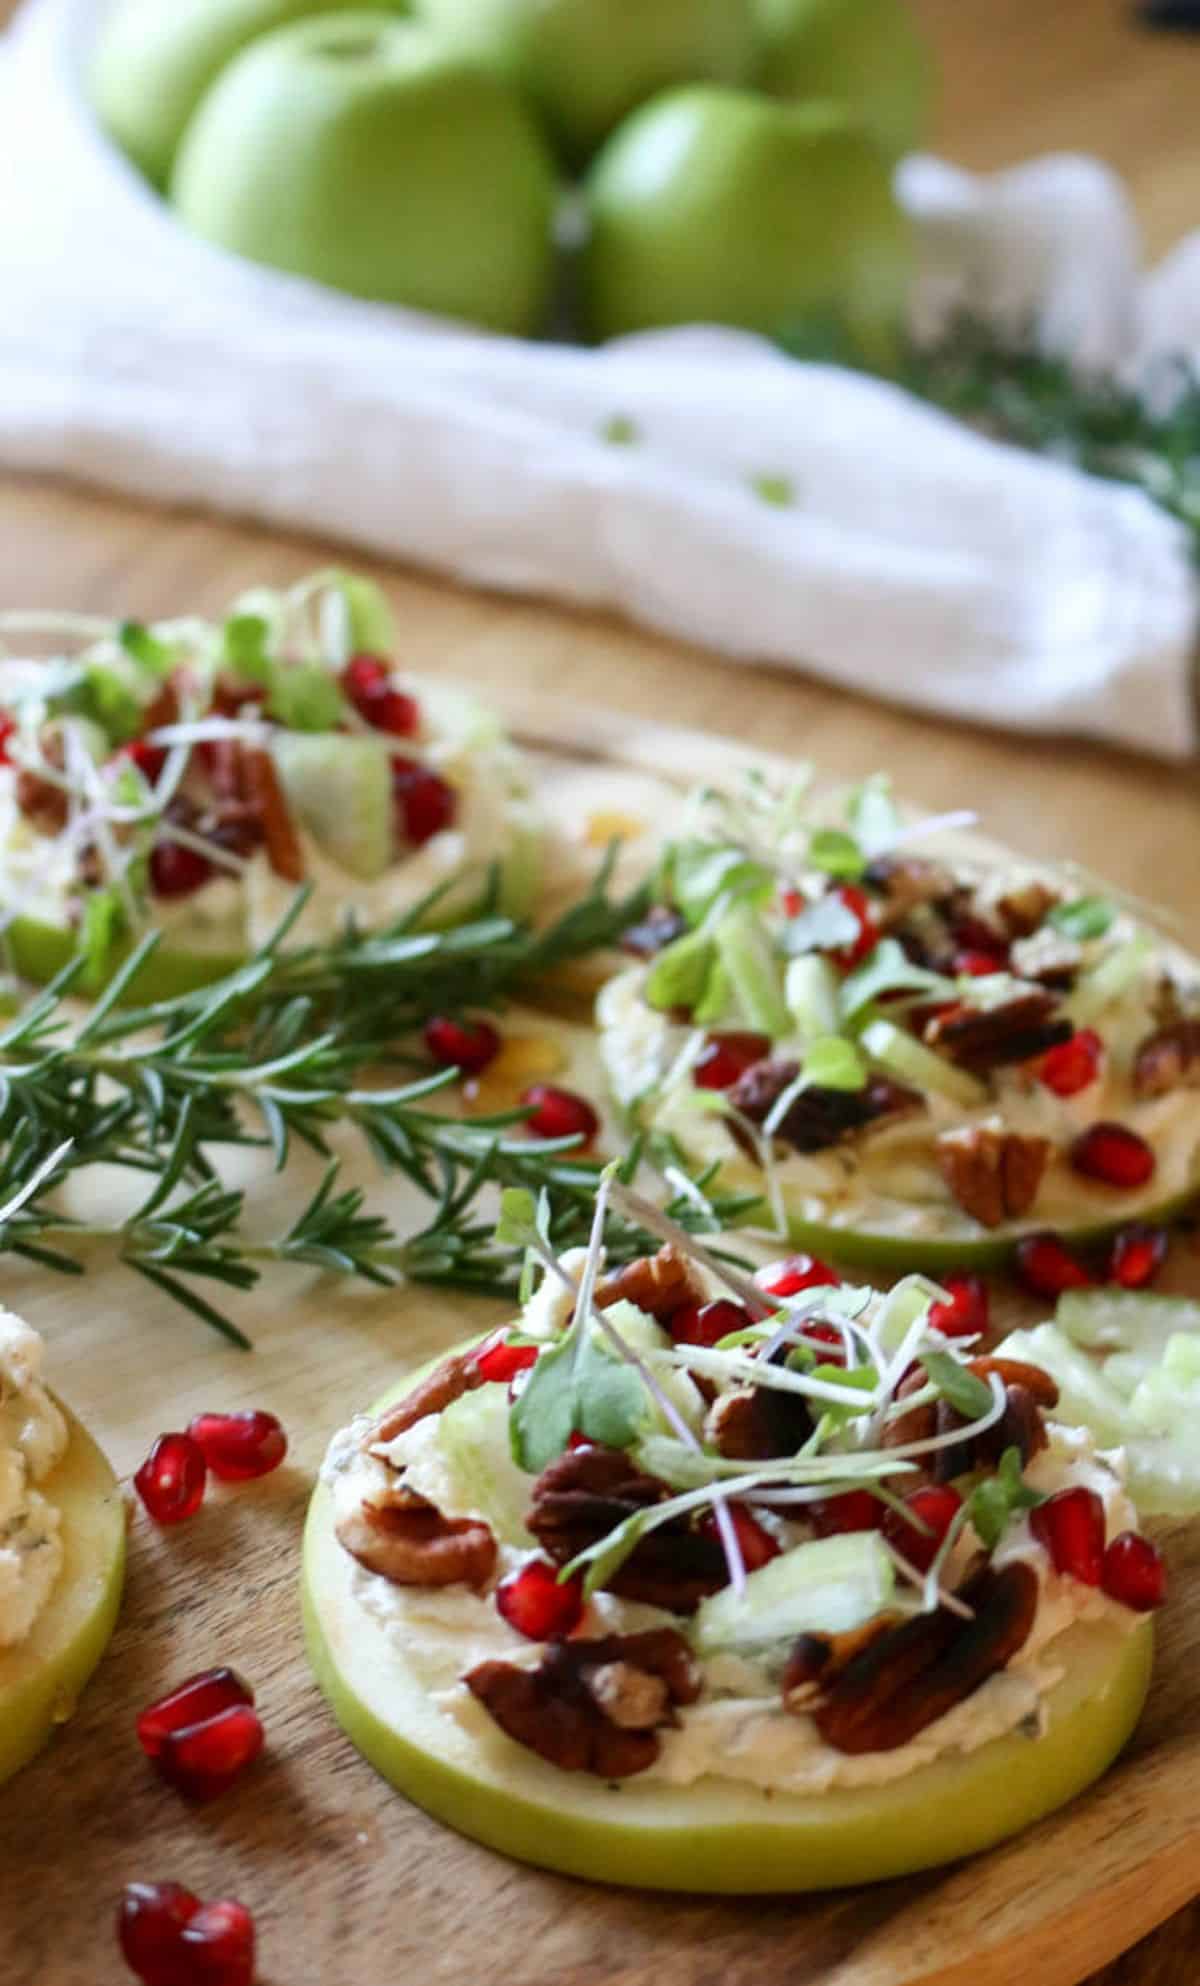 Savory Sliced Apple Appetizers on a wooden cutting board.